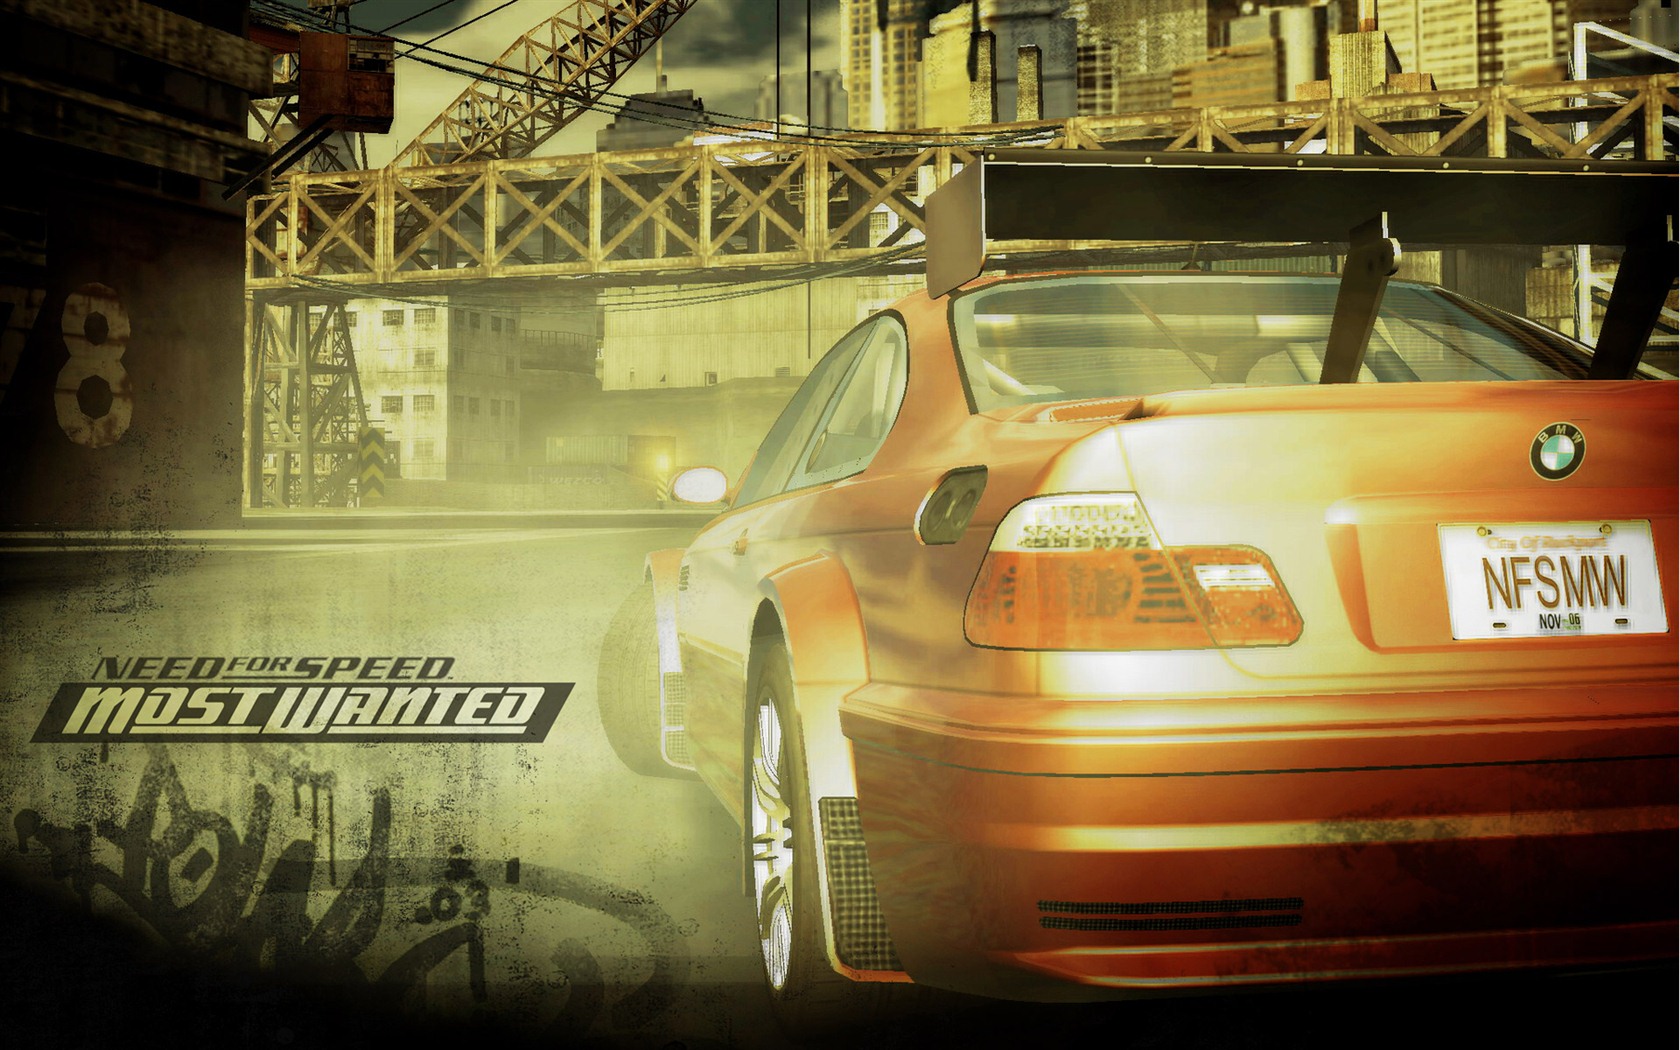 Need for Speed: Most Wanted 极品飞车17：最高通缉 高清壁纸4 - 1680x1050